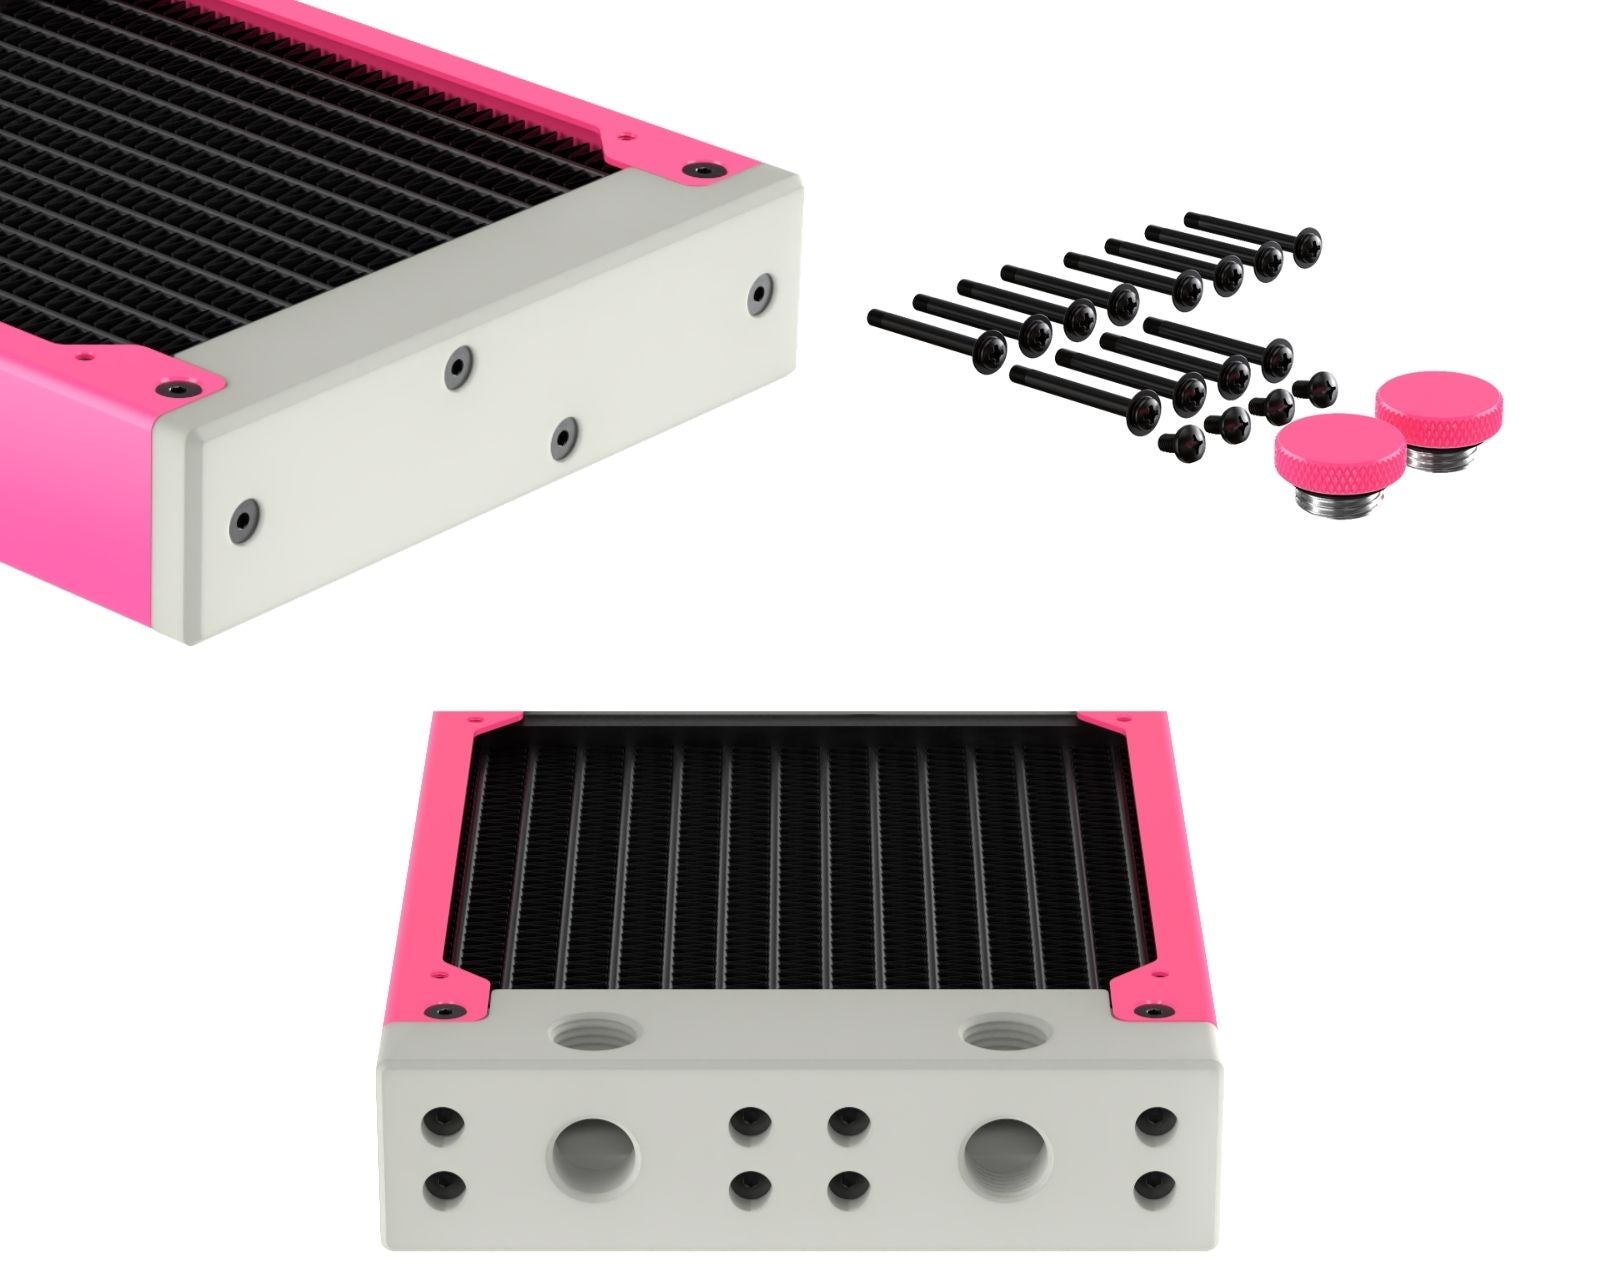 PrimoChill 360SL (30mm) EXIMO Modular Radiator, White POM, 3x120mm, Triple Fan (R-SL-W36) Available in 20+ Colors, Assembled in USA and Custom Watercooling Loop Ready - UV Pink